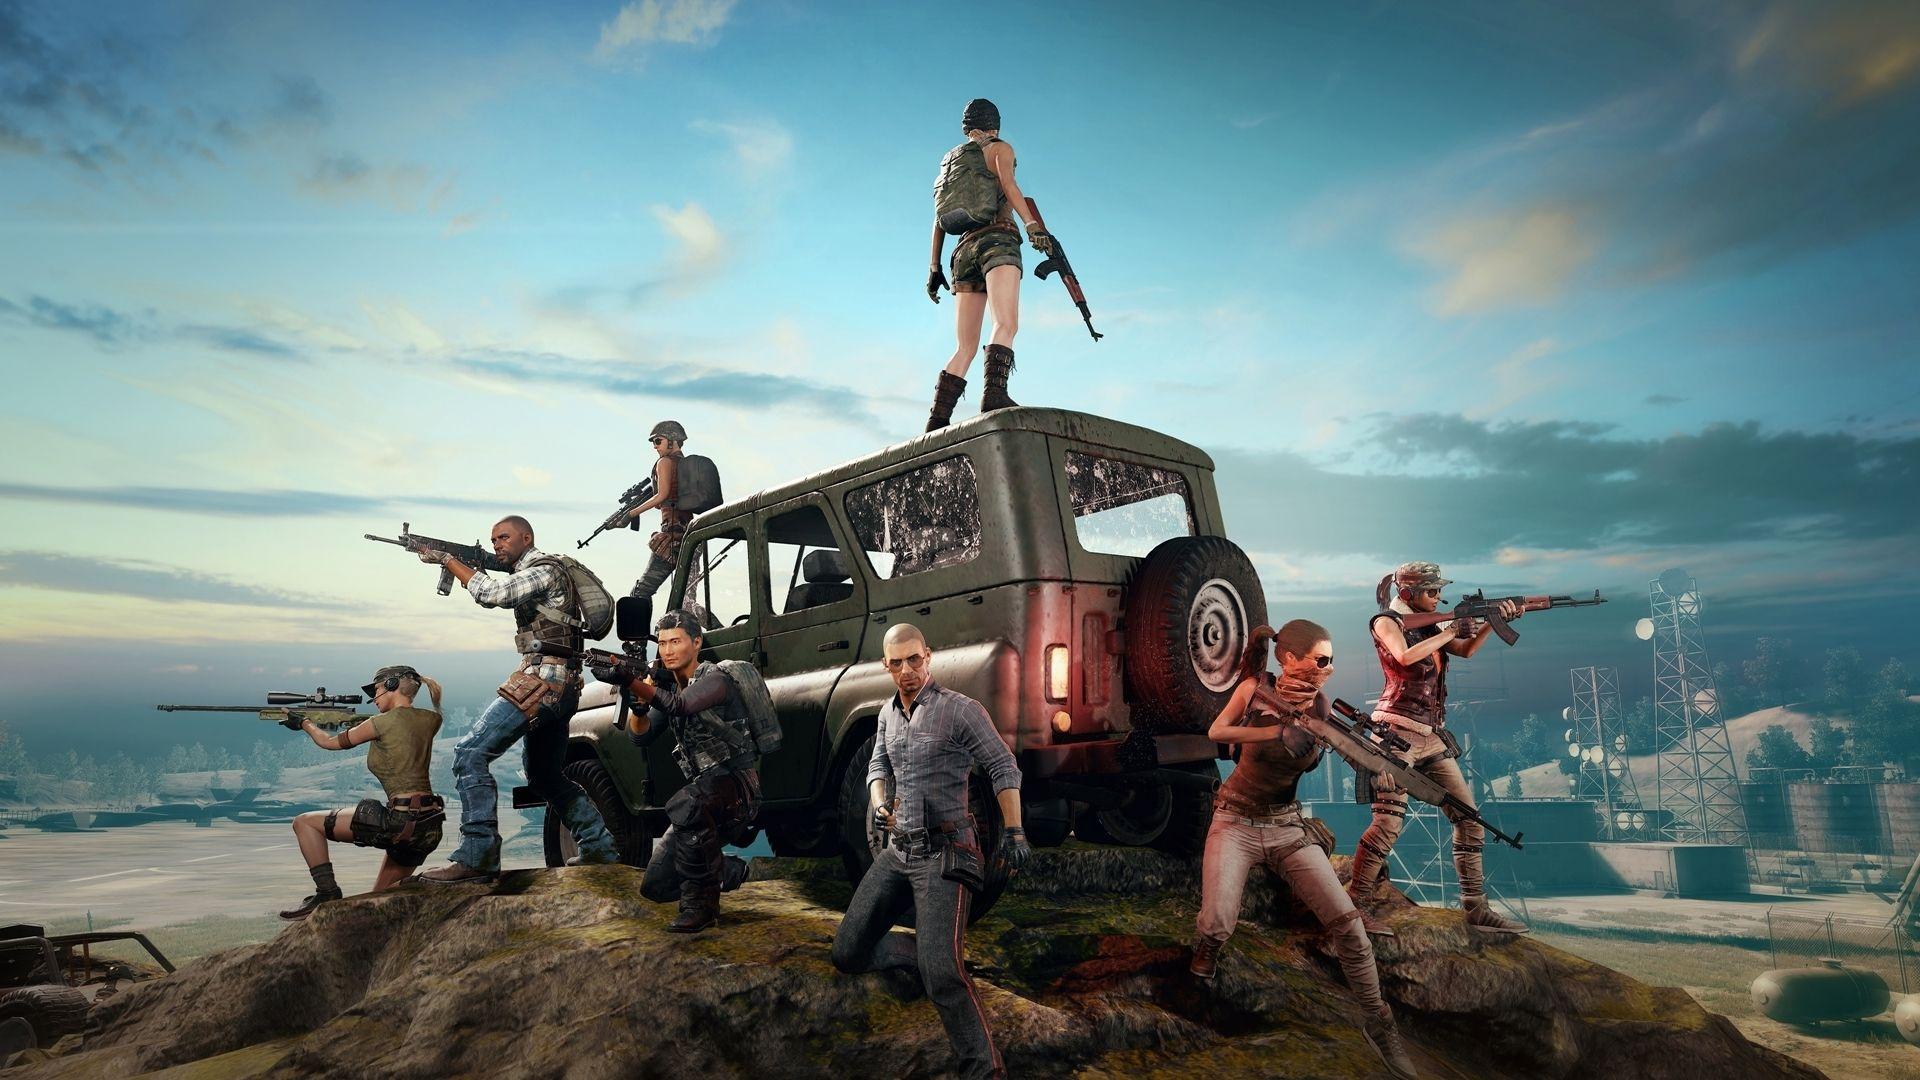 Hd Wallpapers Of Pubg For Mobile